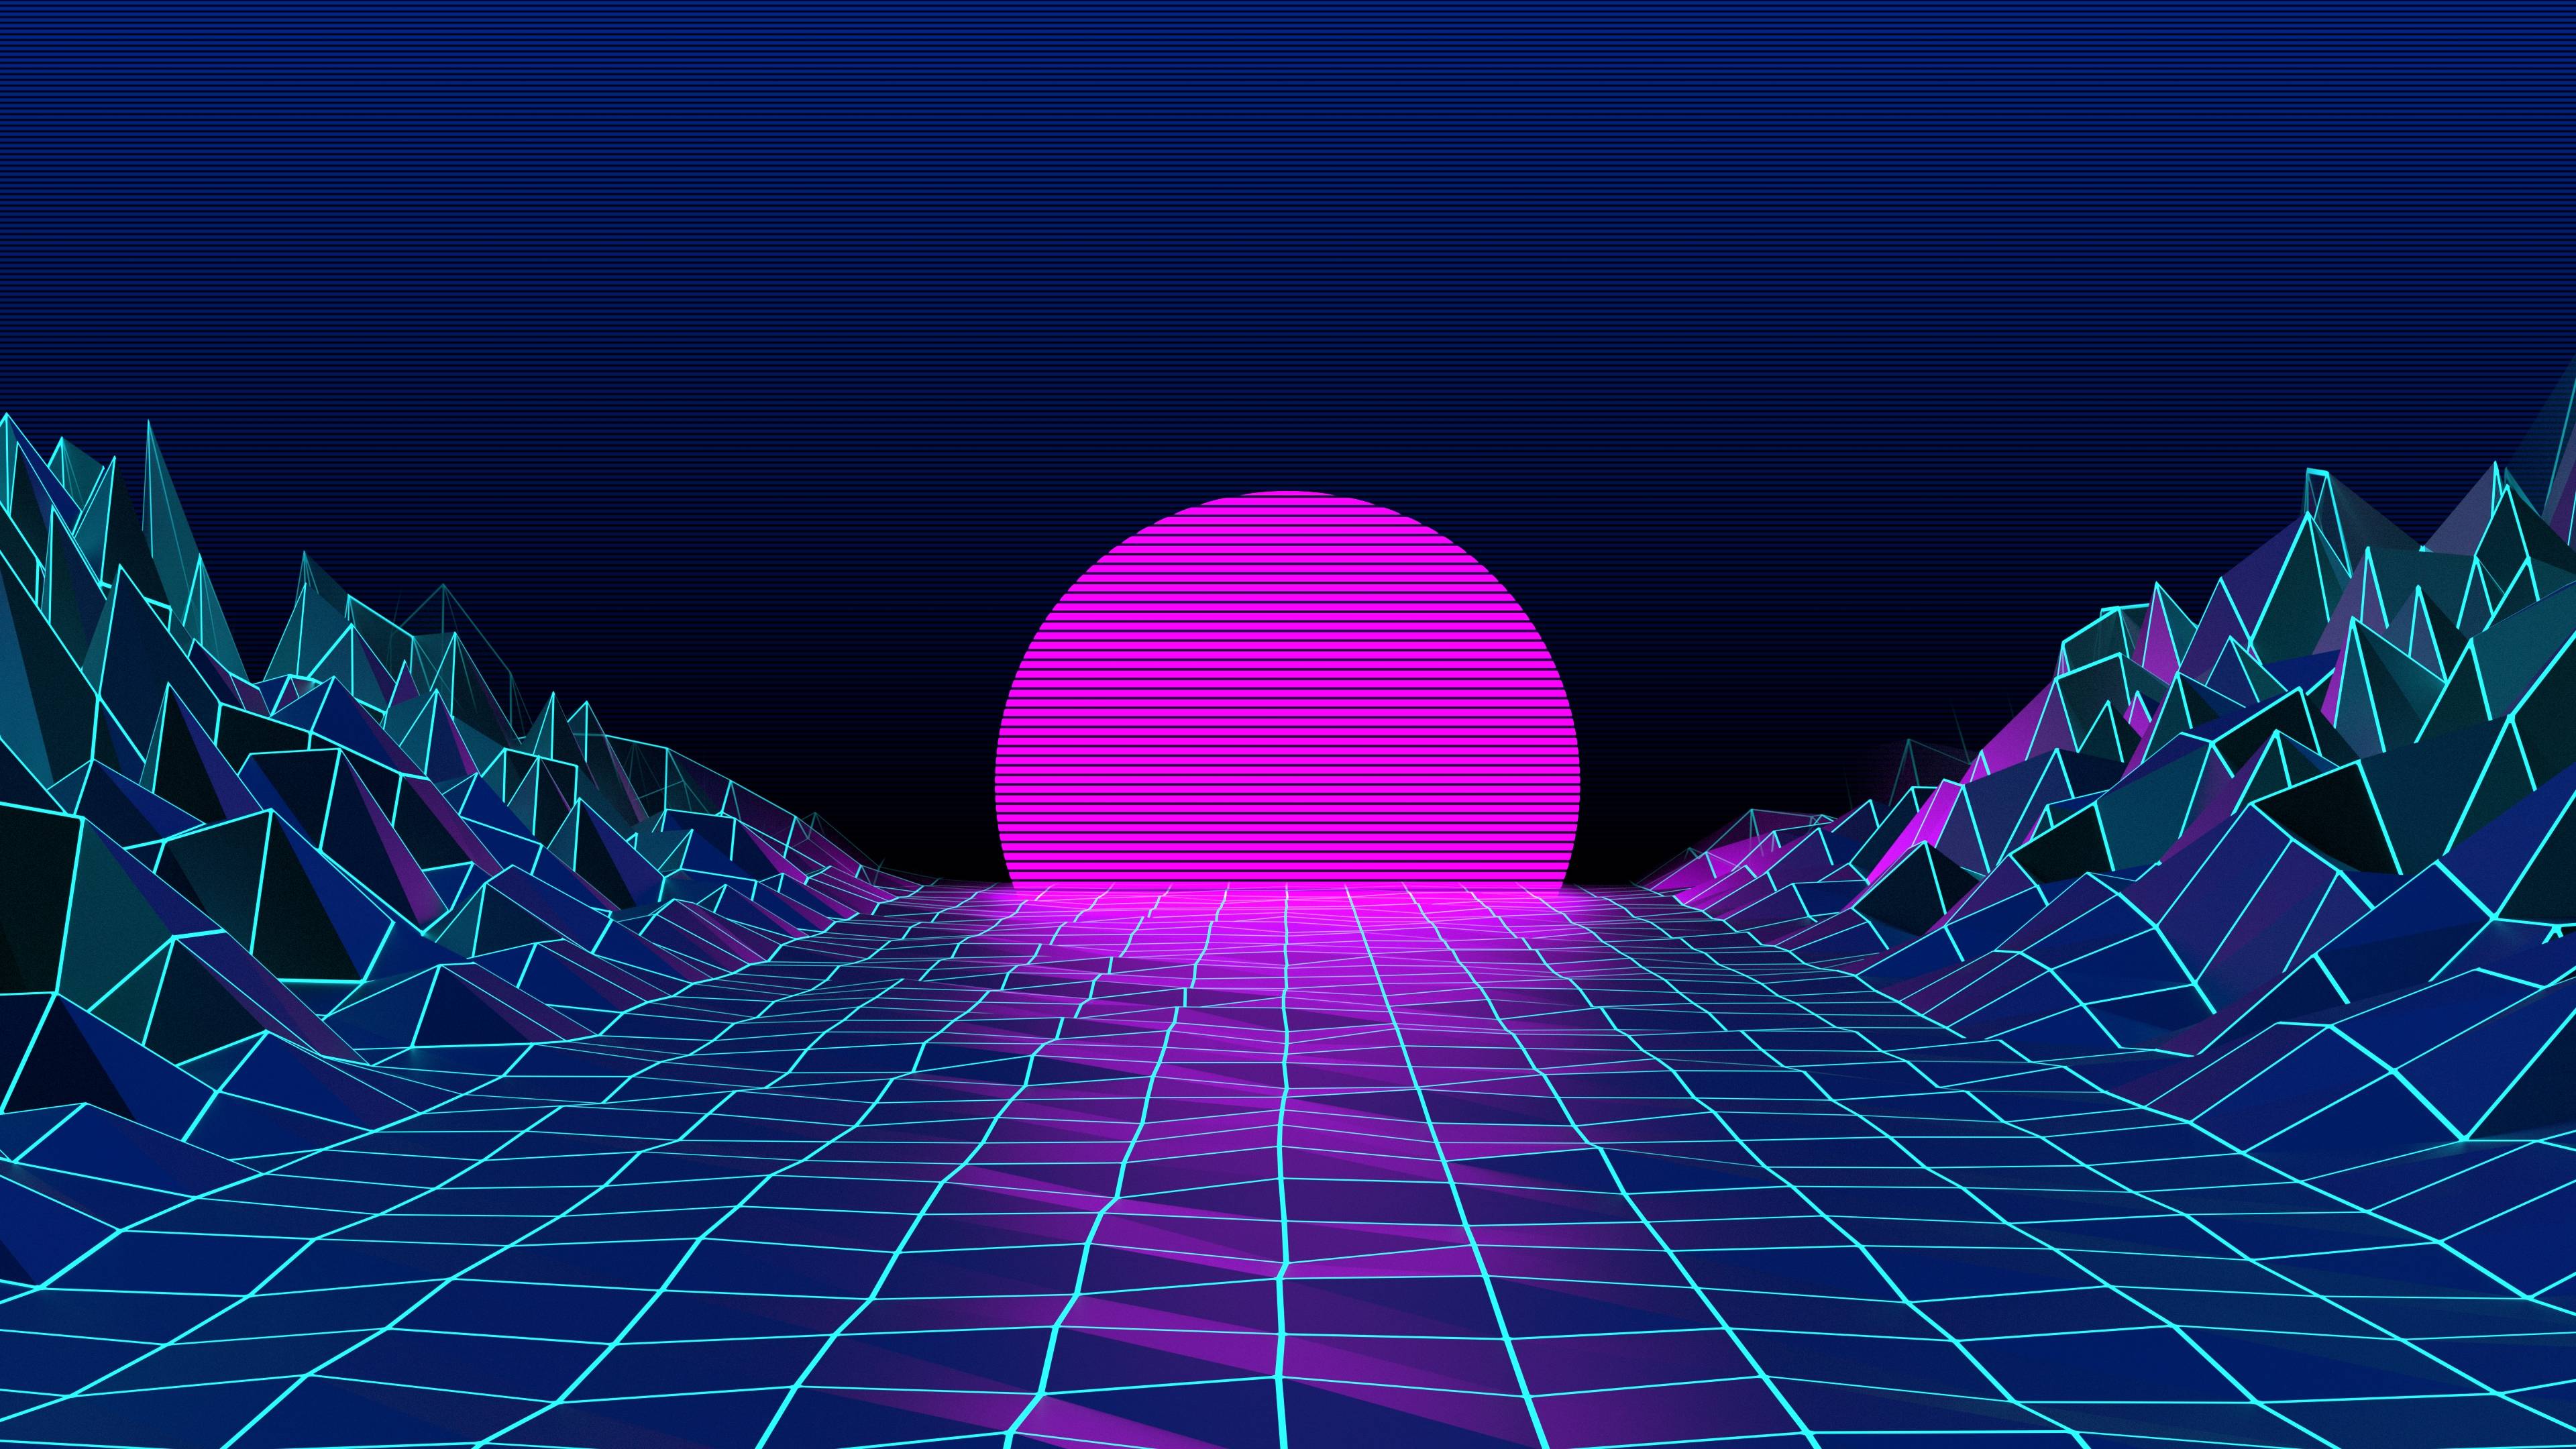 A futuristic neon landscape with a pink glowing sphere in the background - 90s